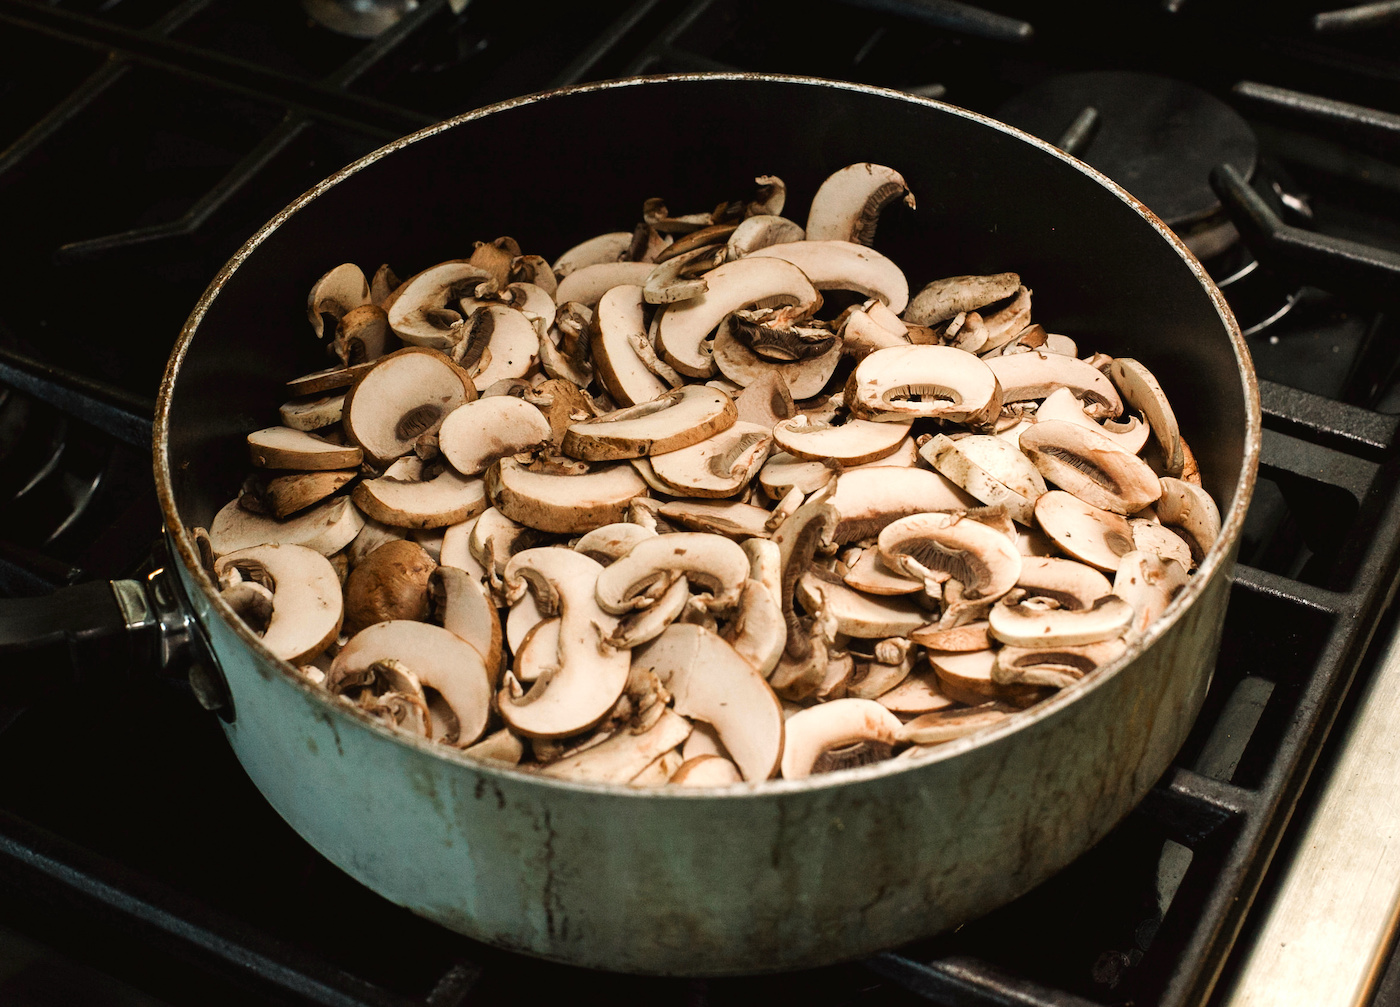 Add the mushrooms to the pan